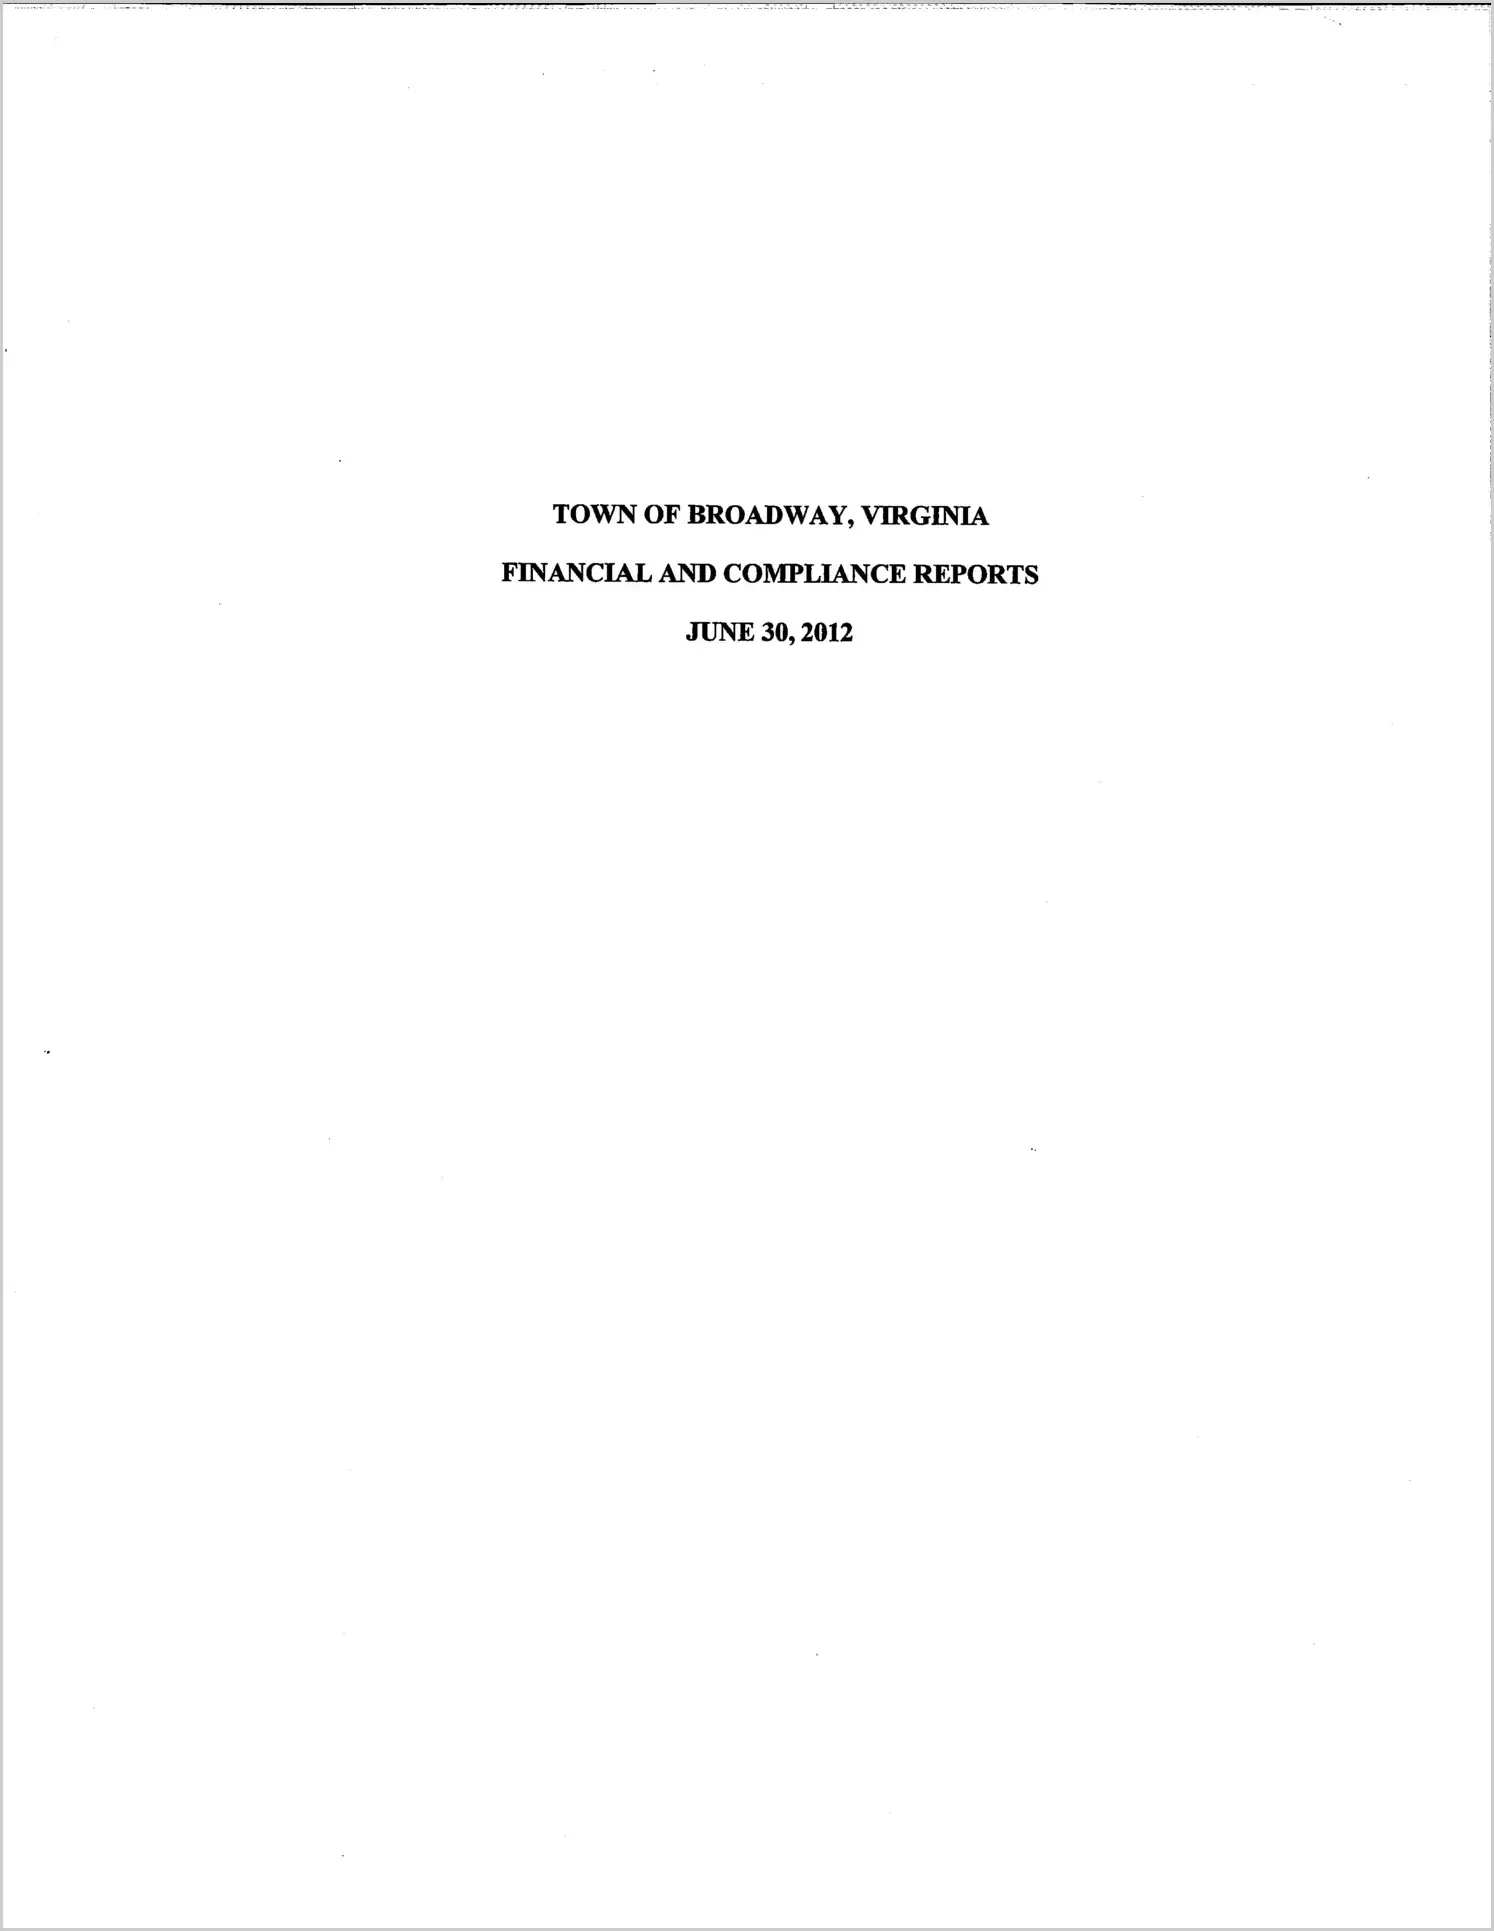 2012 Annual Financial Report for Town of Broadway